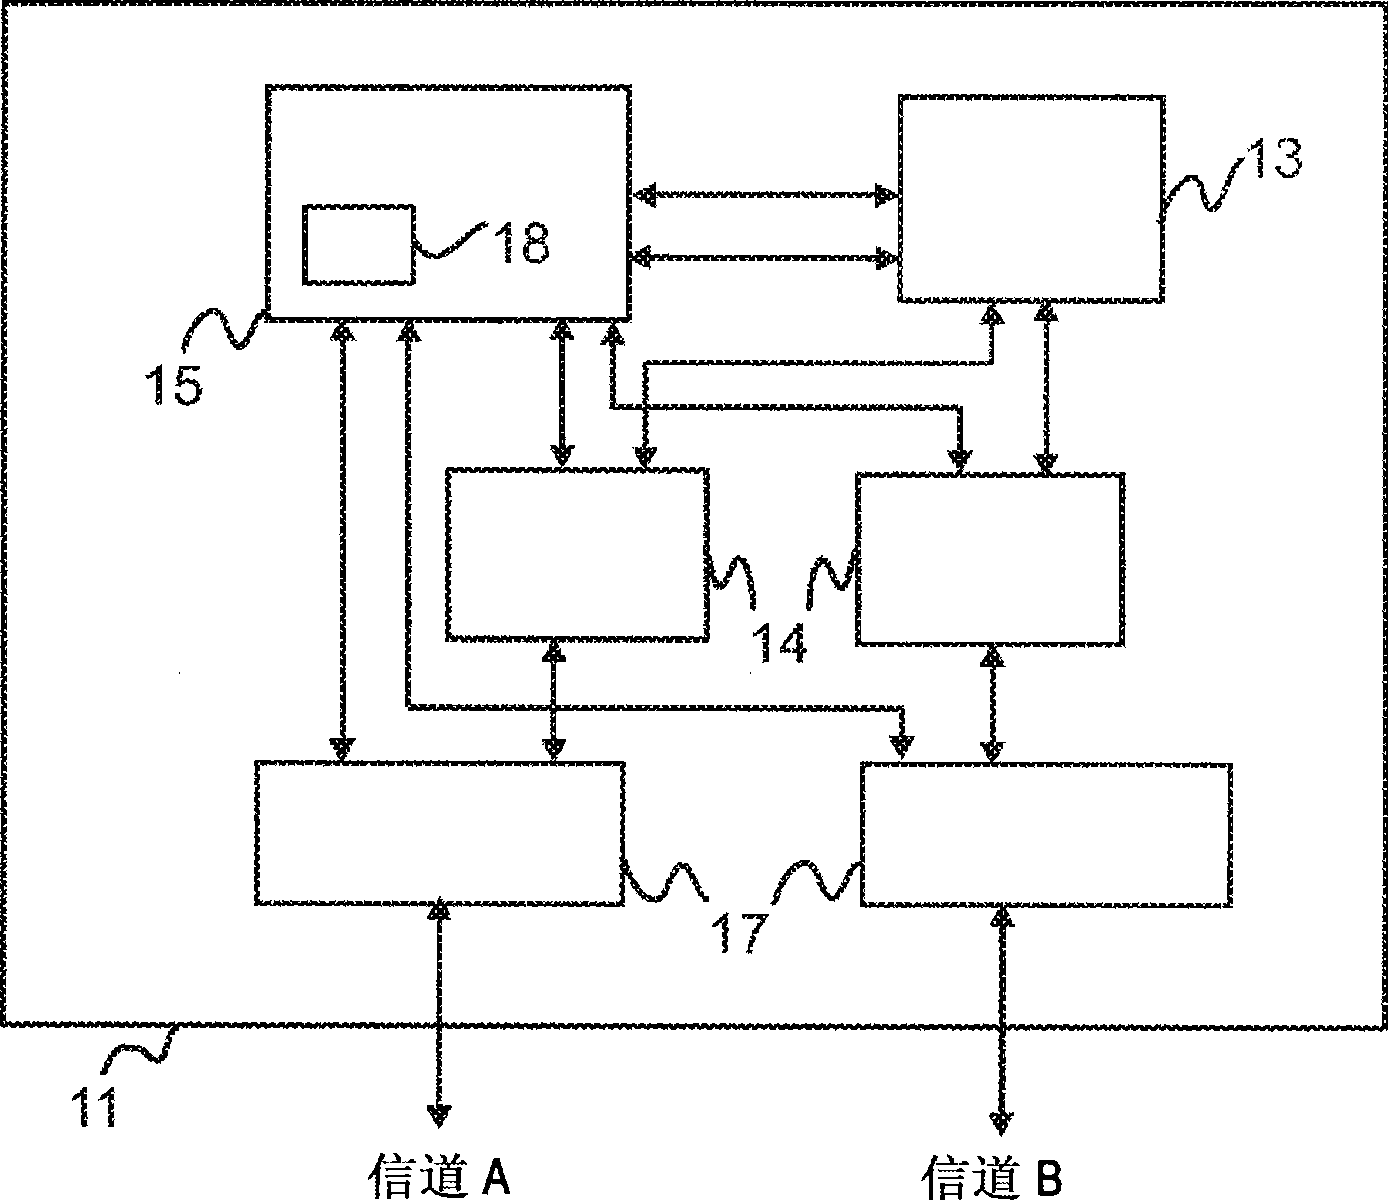 Network and method for clock synchronization of clusters in a time triggered network